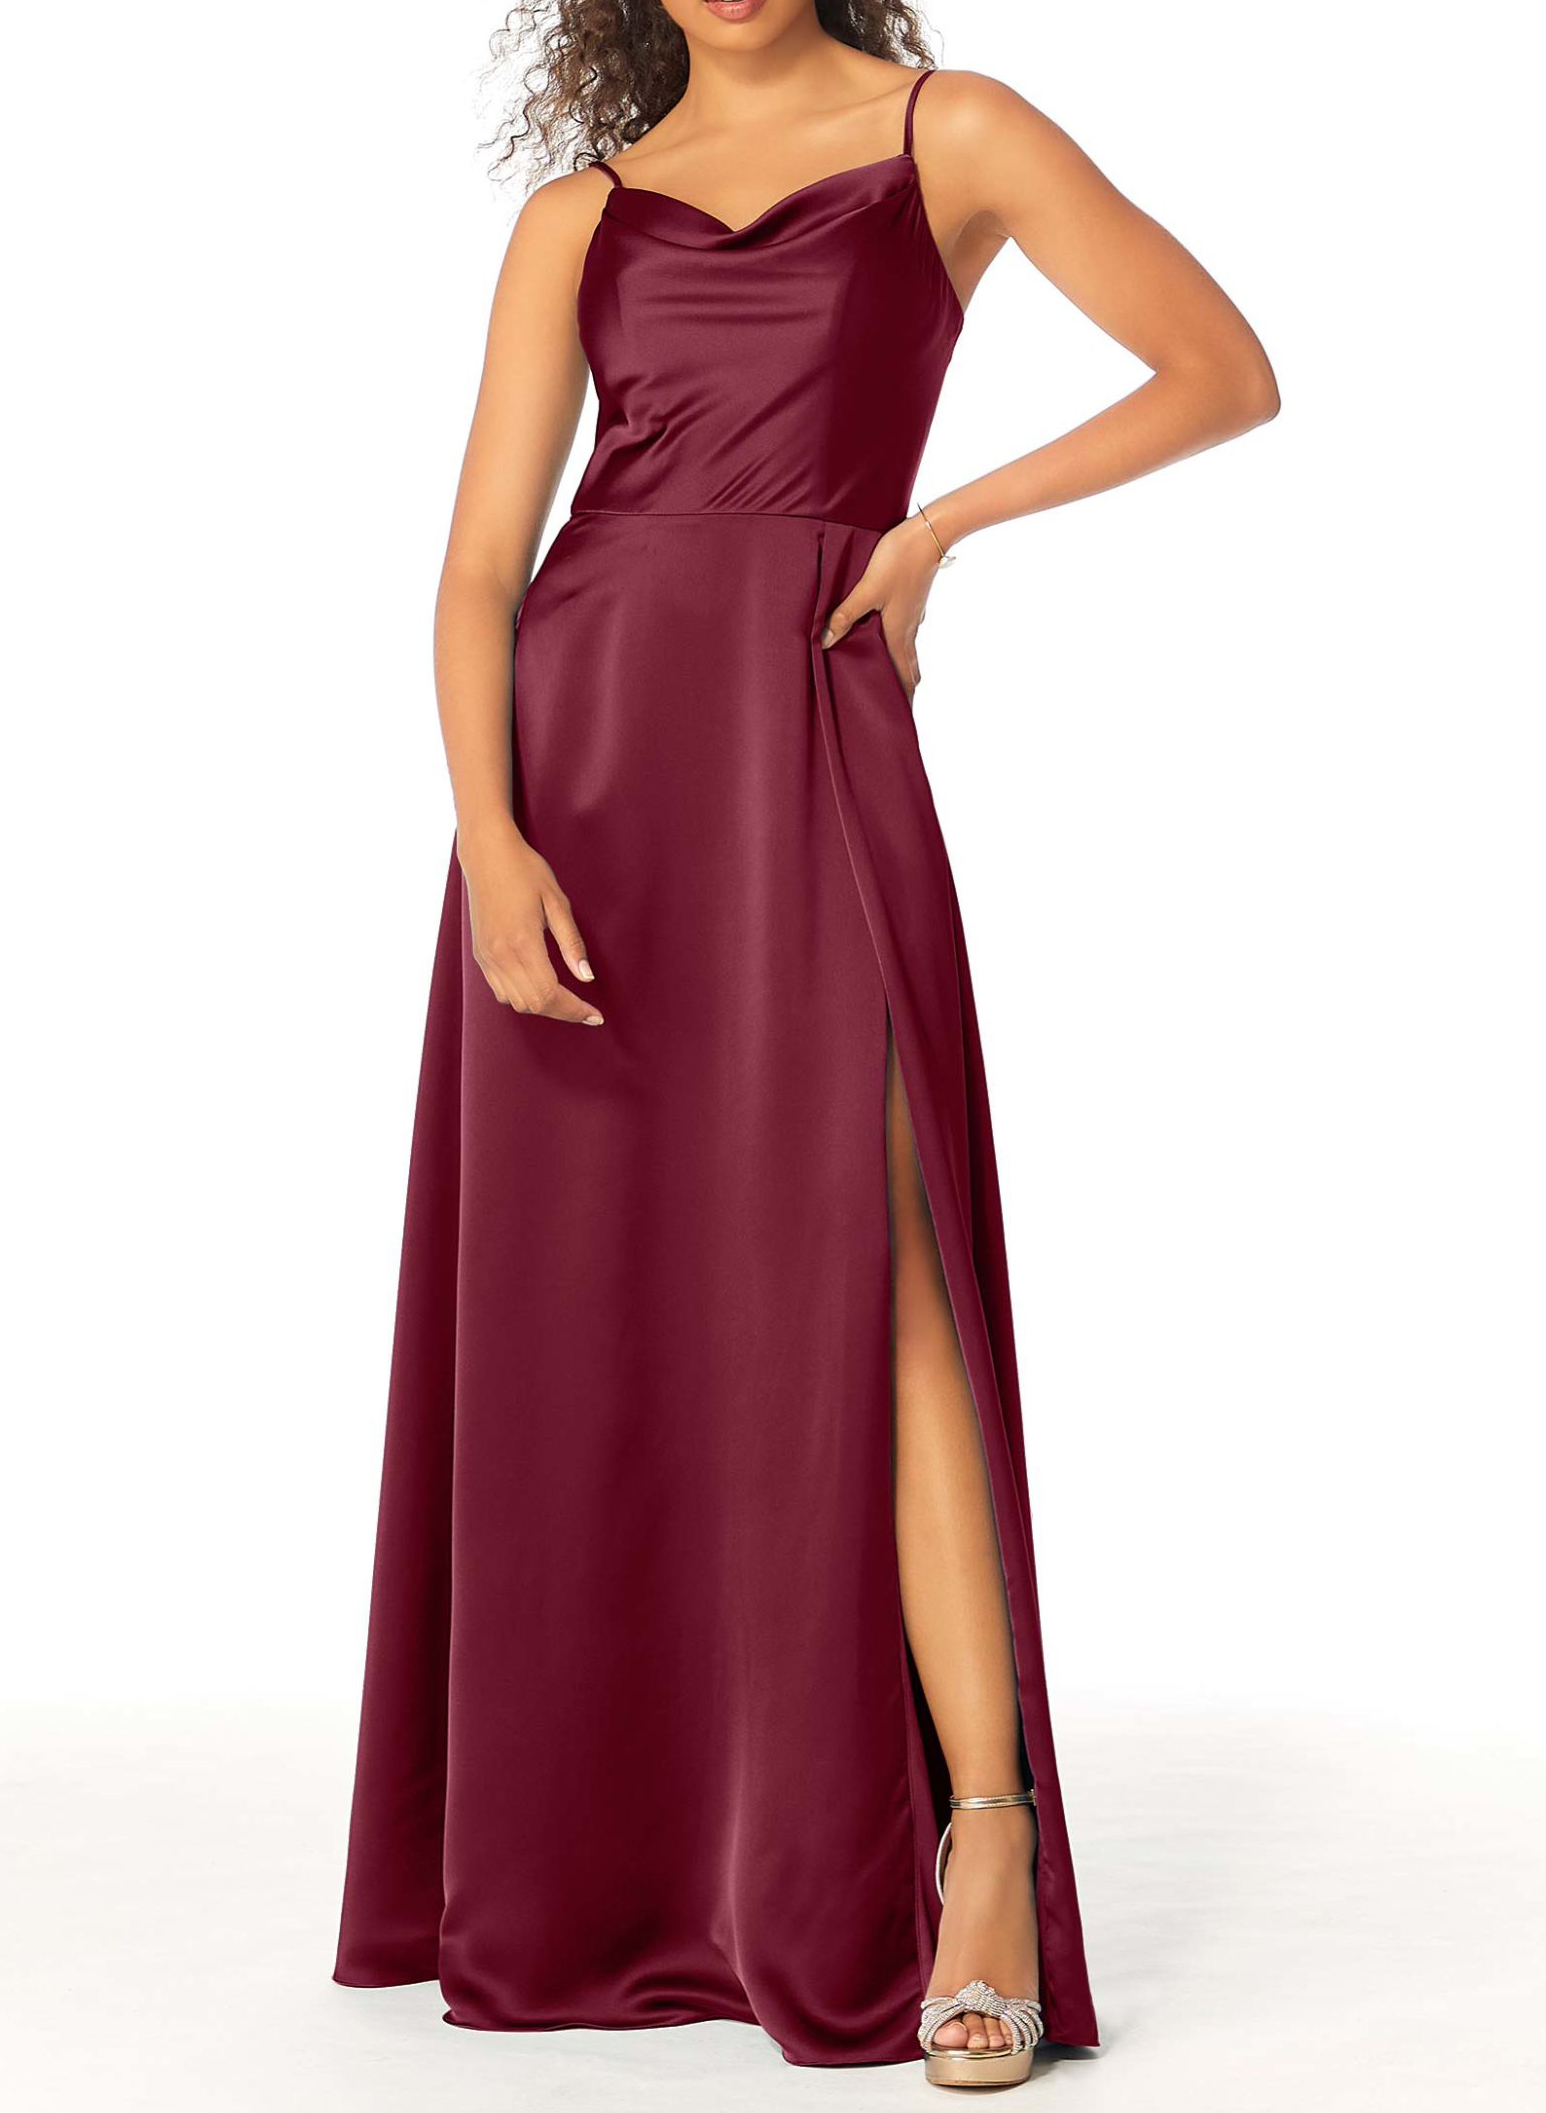 Cowl Neck Satin Bridesmaid Dresses With A-Line